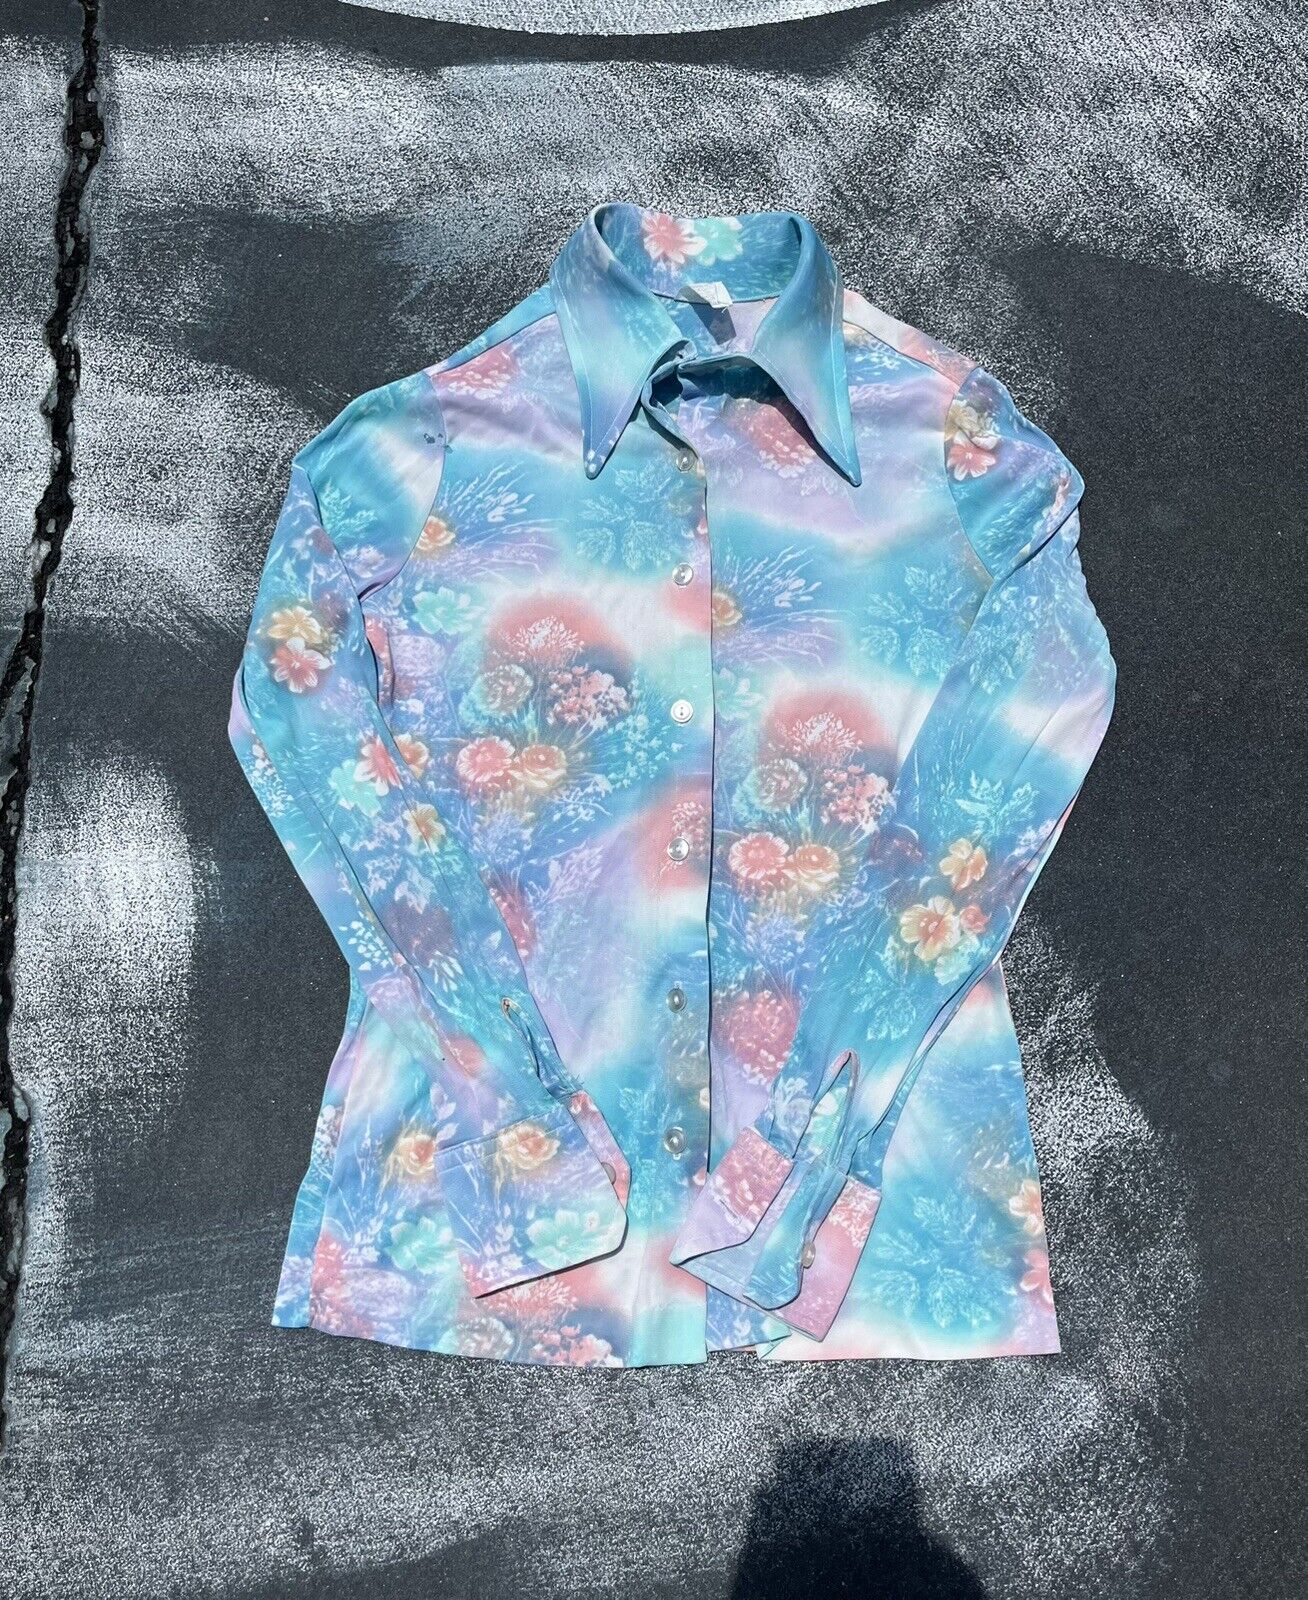 Vintage 70s Women’s Button Up Shirt Pointed Collar Floral Colorful Pattern Hippy